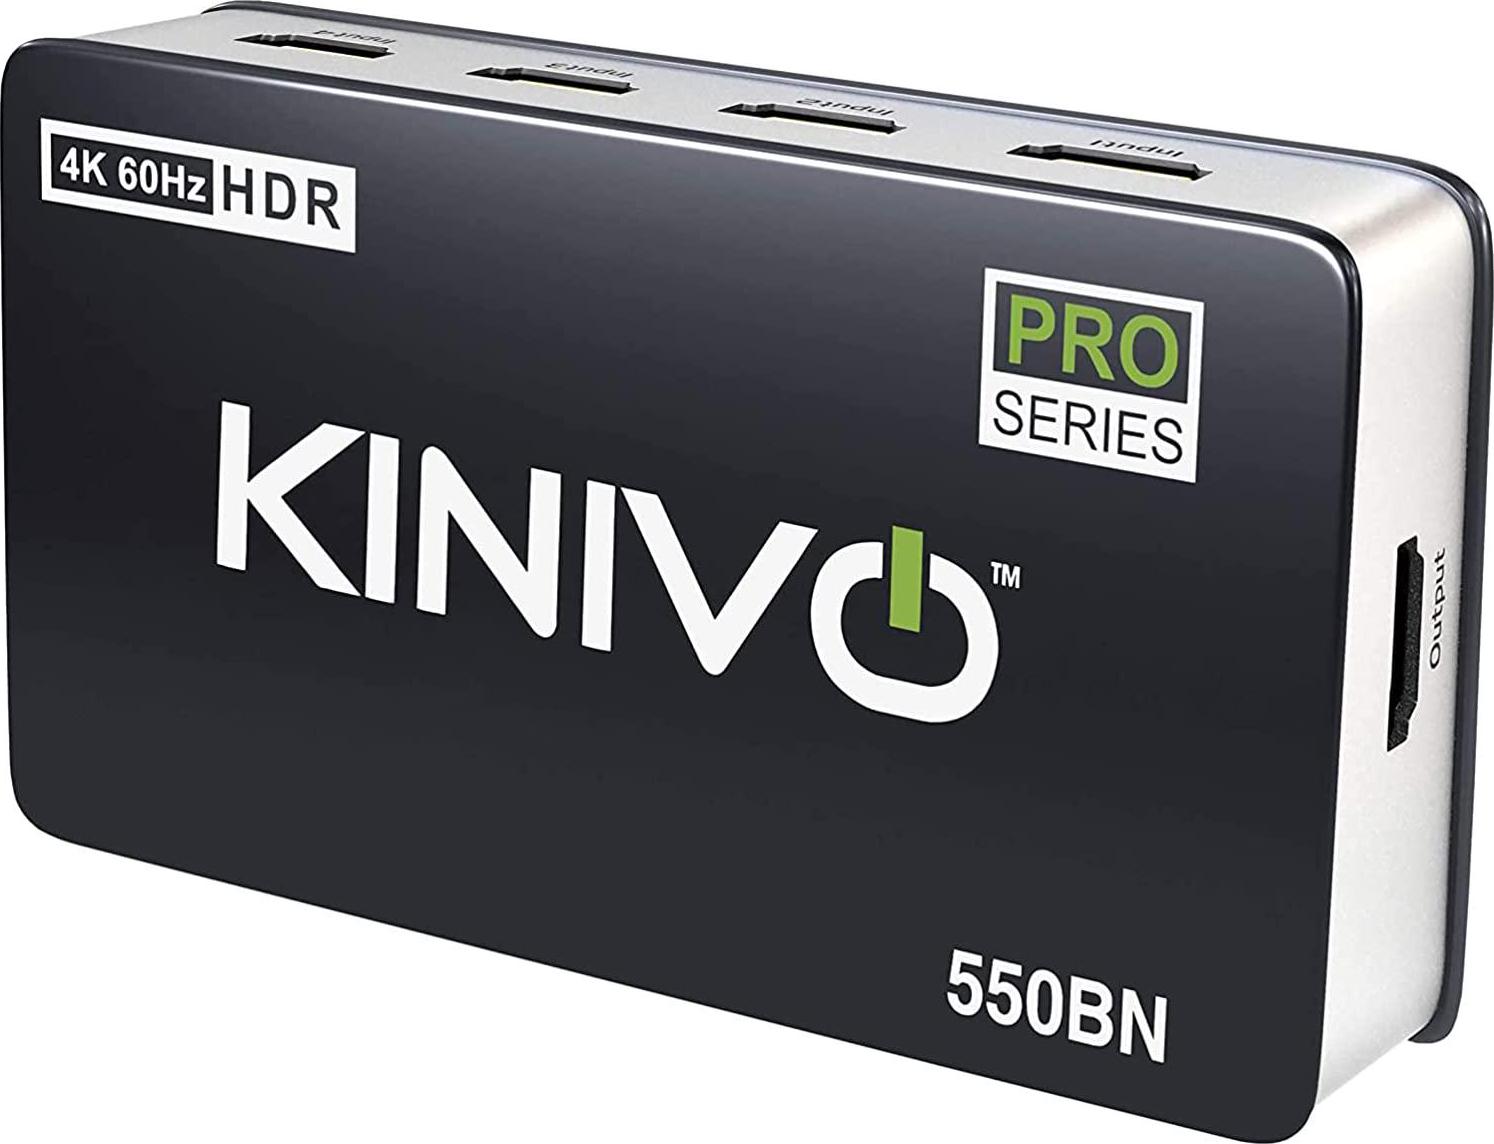 Kinivo, Kinivo 550BN 4K HDMI Switch 5 Port with IR Wireless Remote (4K 60Hz, HDR, HDCP, 3D, 18Gbps, Auto Switch) for Game Consoles, Apple TV, HDTV, Blu-ray, Laptop